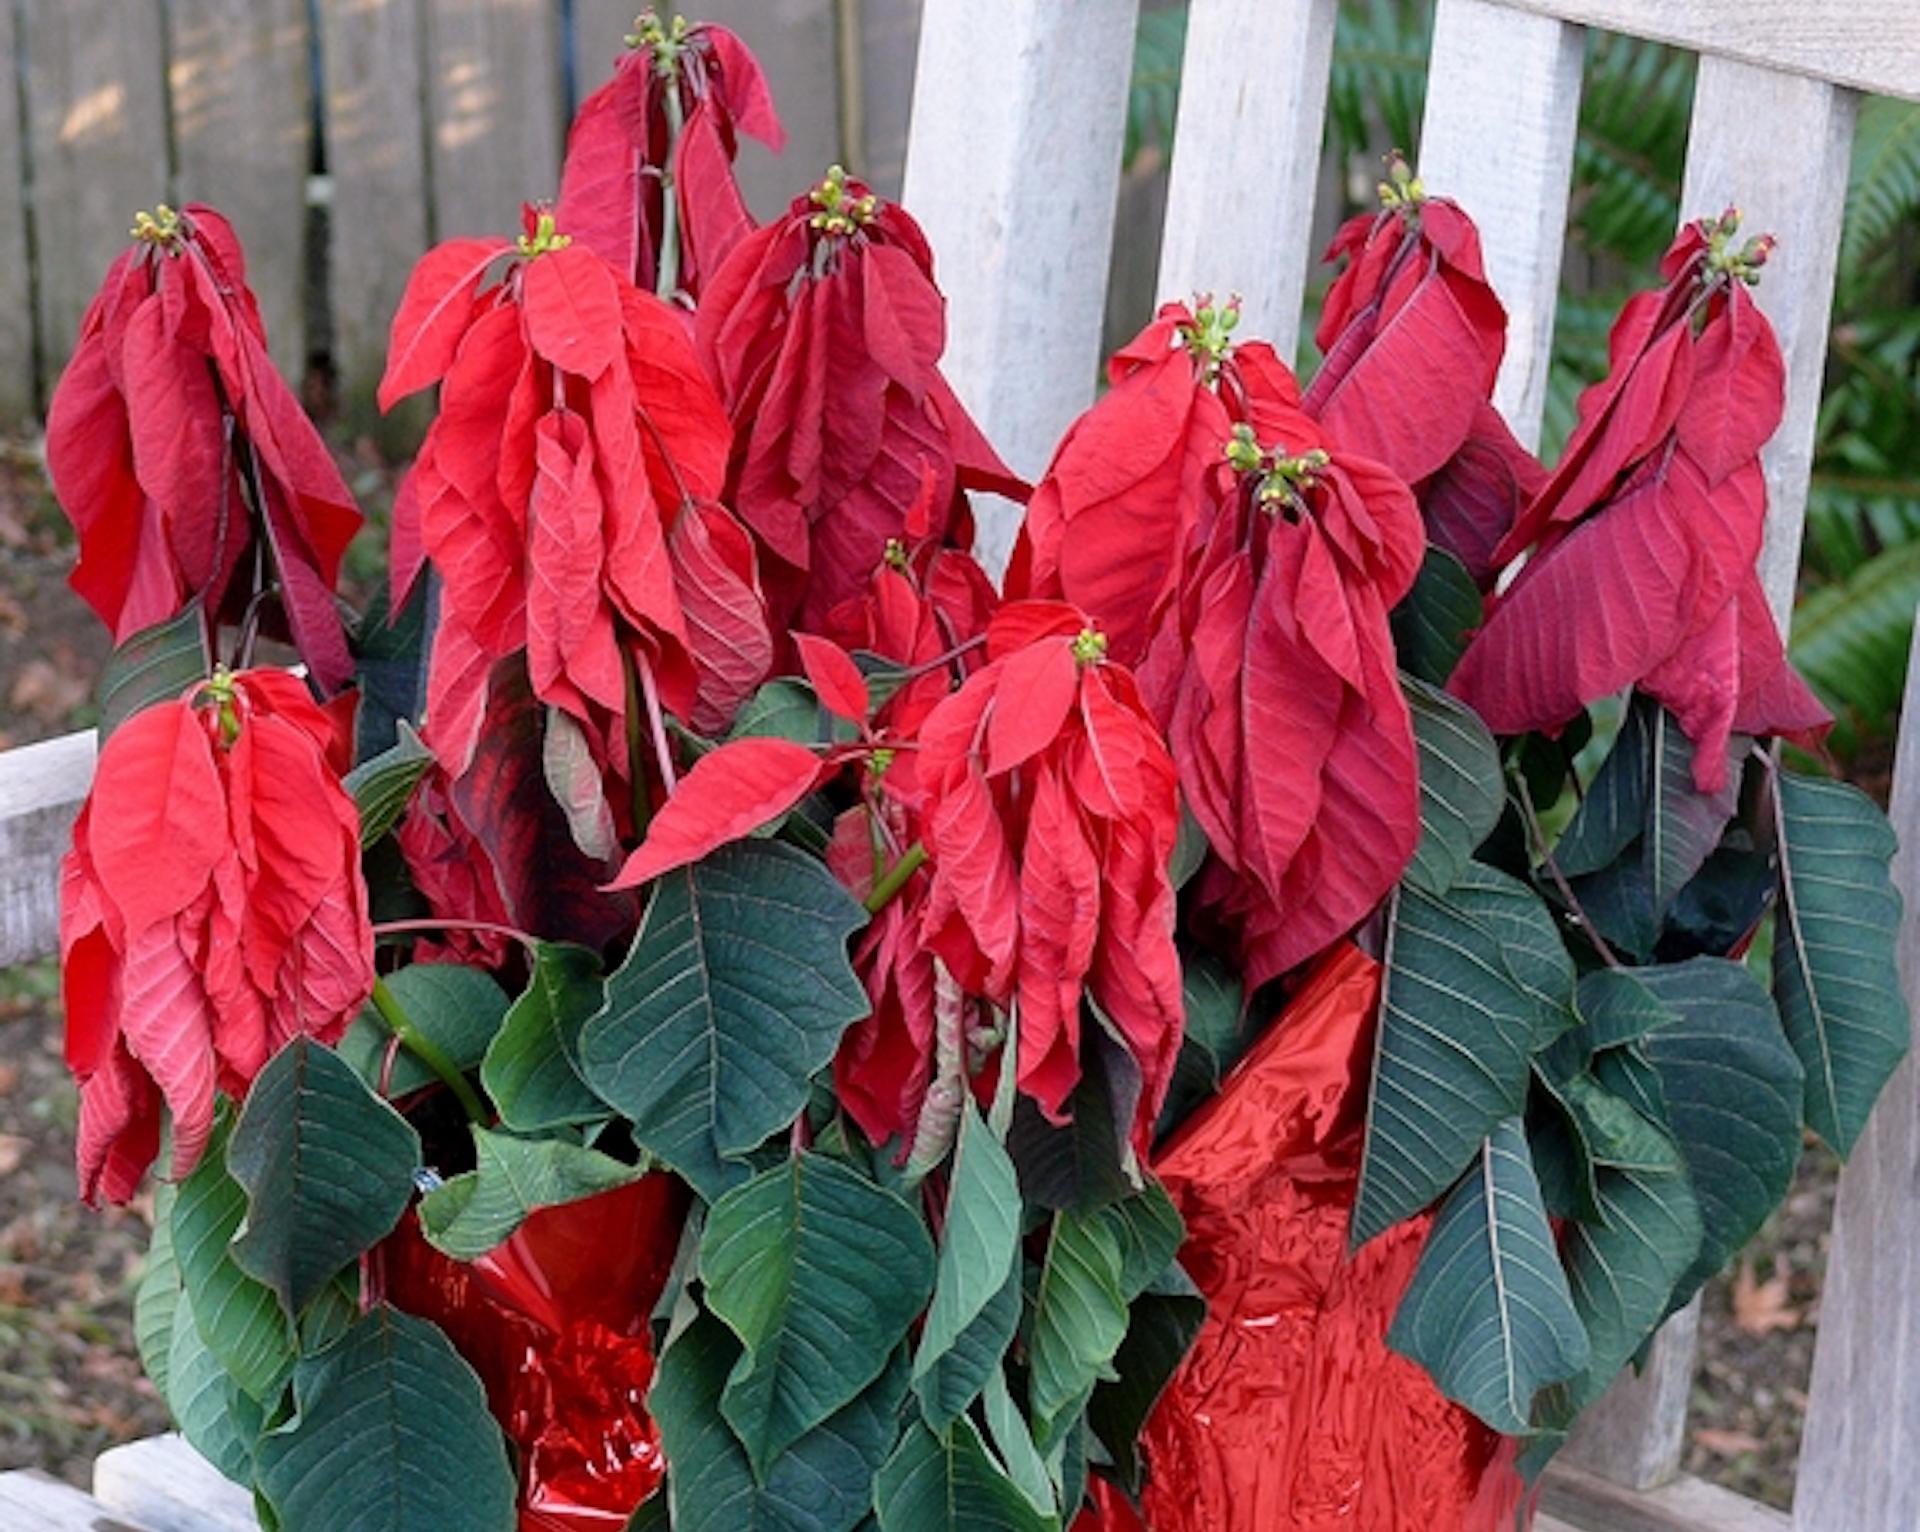 Severely wilted poinsettia